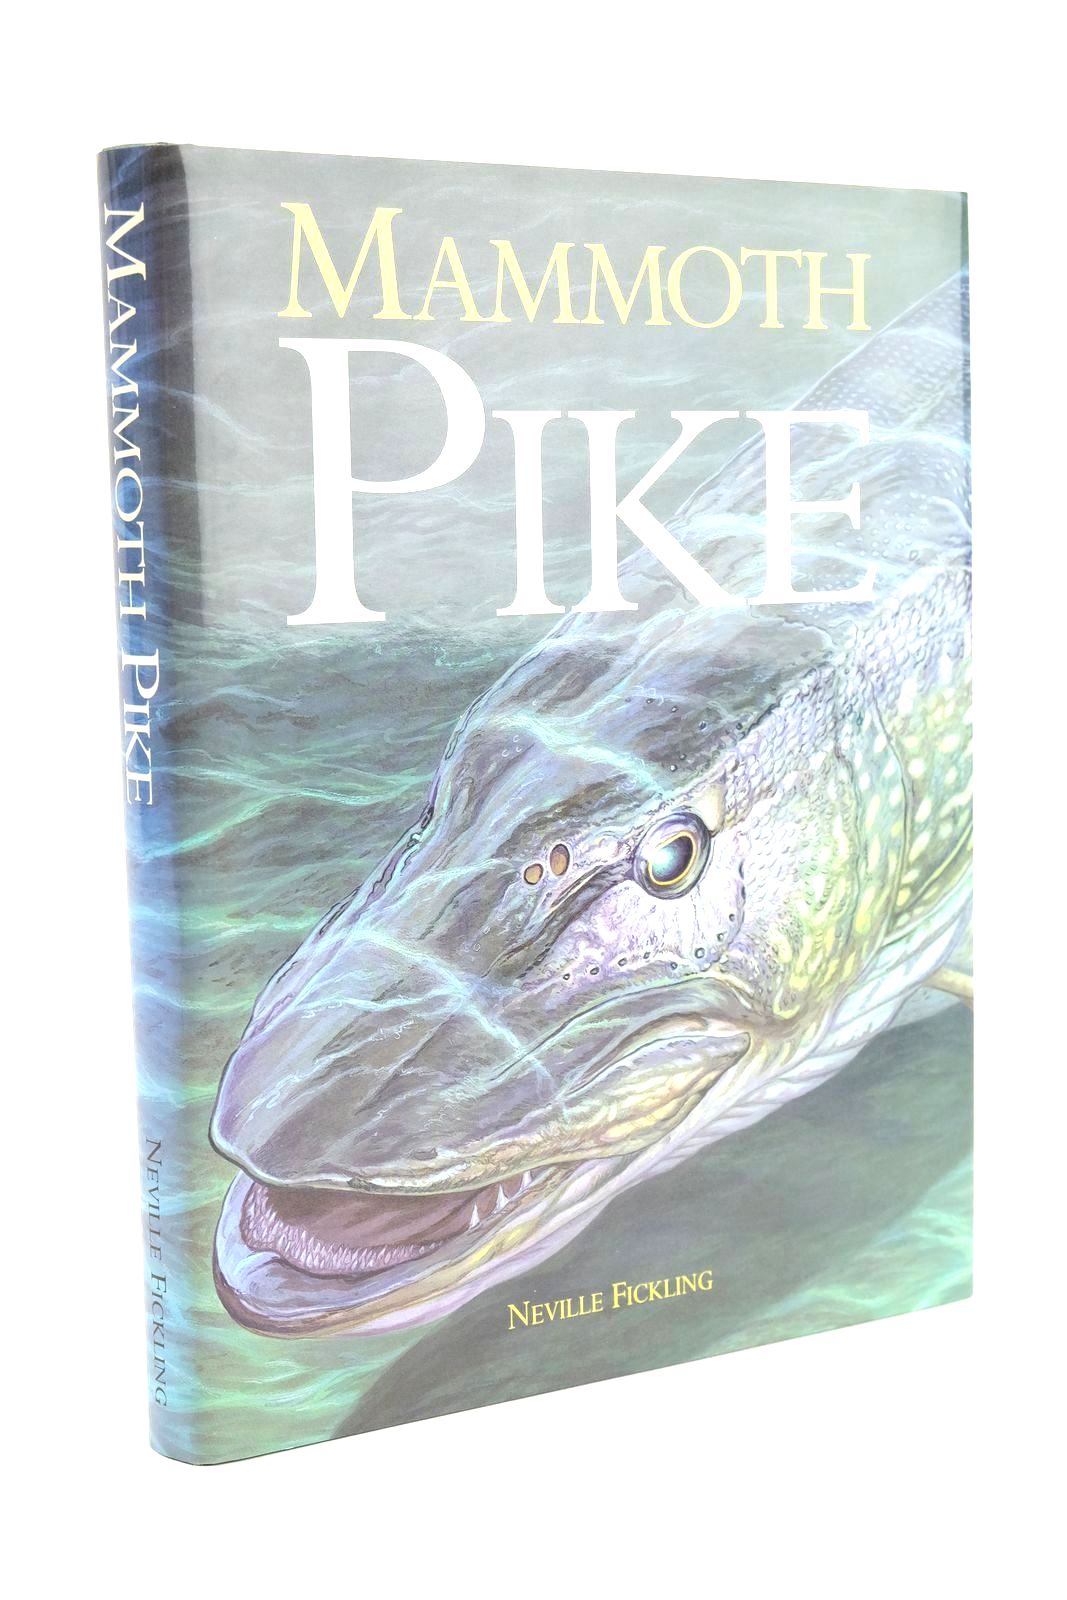 Photo of MAMMOTH PIKE written by Fickling, Neville published by Lucebaits Publishing (STOCK CODE: 1323836)  for sale by Stella & Rose's Books